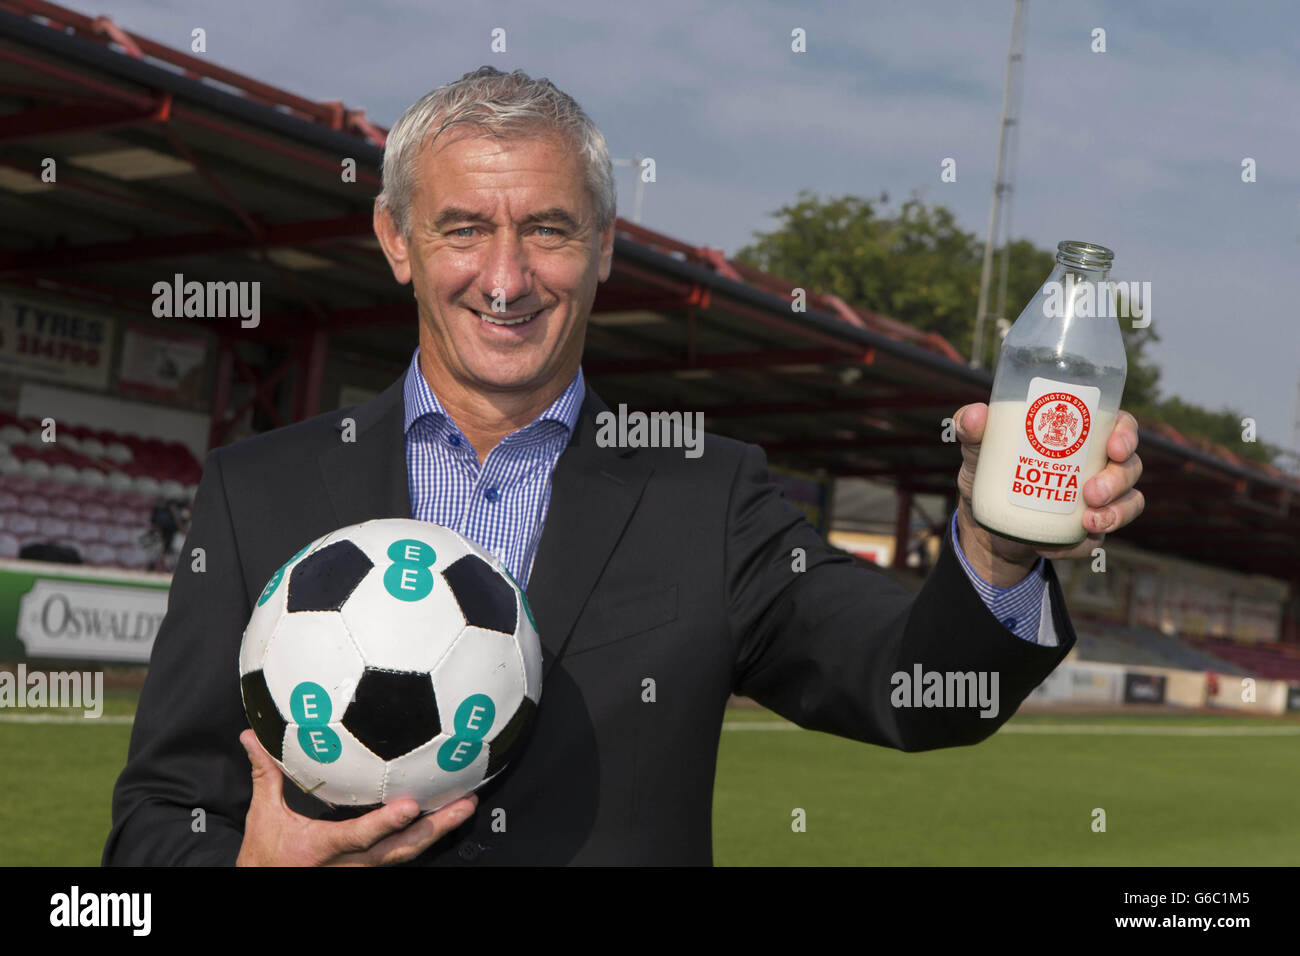 Football legend Ian Rush, who starred in the 1980s Milk Marketing Board advert that helped give Accrington Stanley FC national recognition, poses with a bottle of milk to mark the launch of the switch on of EE's superfast 4G network in Accrington, Lancashire - the 100th town to get 4G from EE. Stock Photo